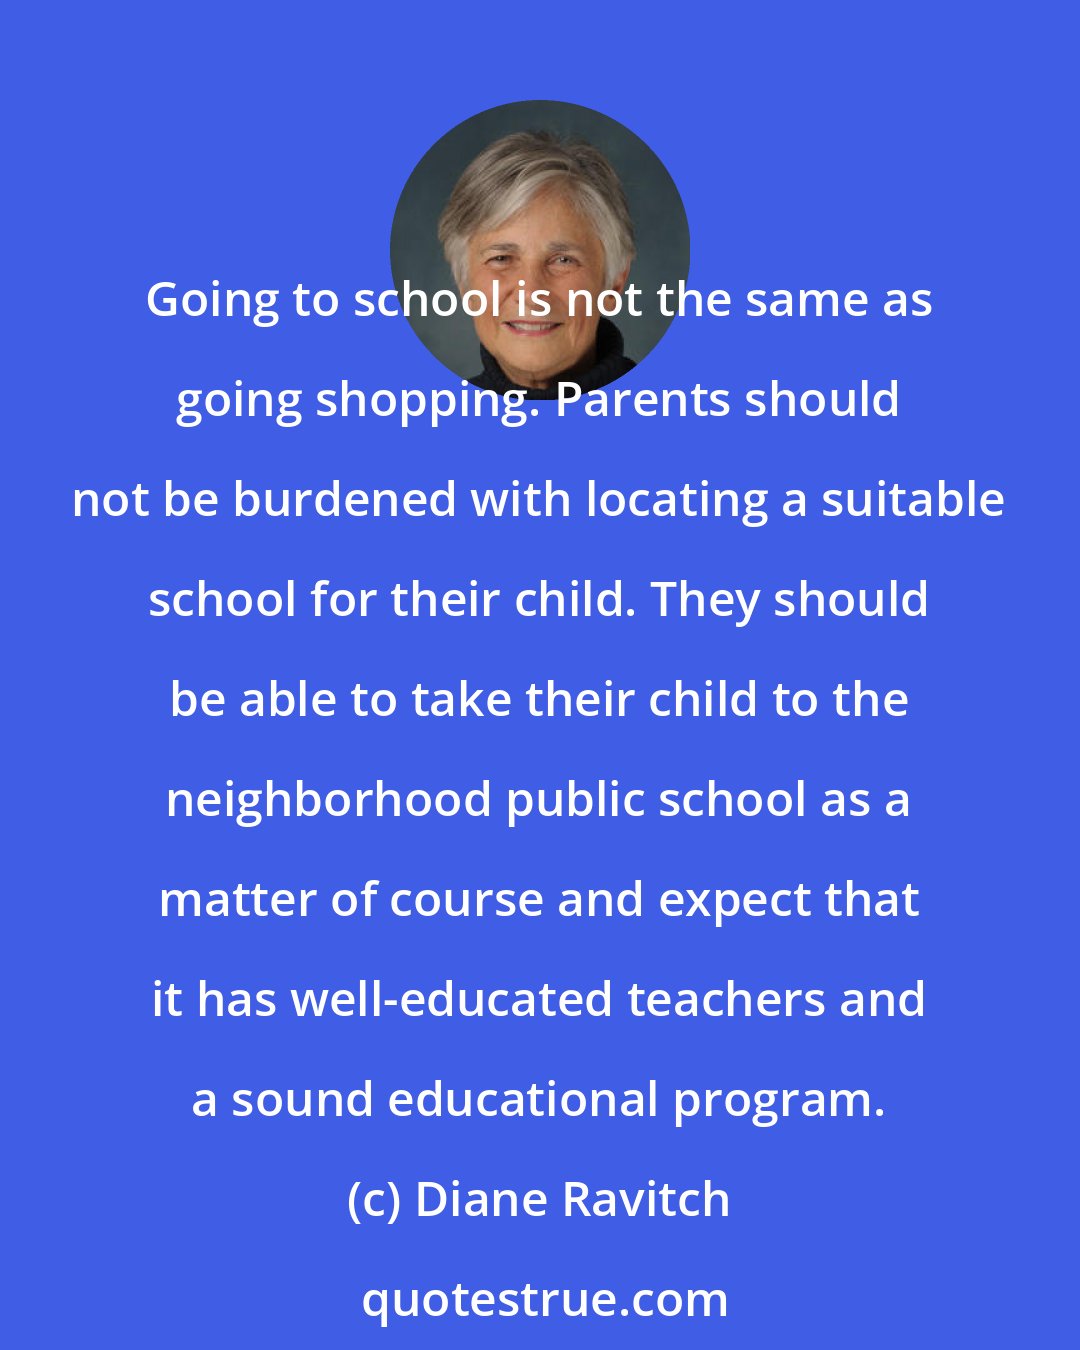 Diane Ravitch: Going to school is not the same as going shopping. Parents should not be burdened with locating a suitable school for their child. They should be able to take their child to the neighborhood public school as a matter of course and expect that it has well-educated teachers and a sound educational program.